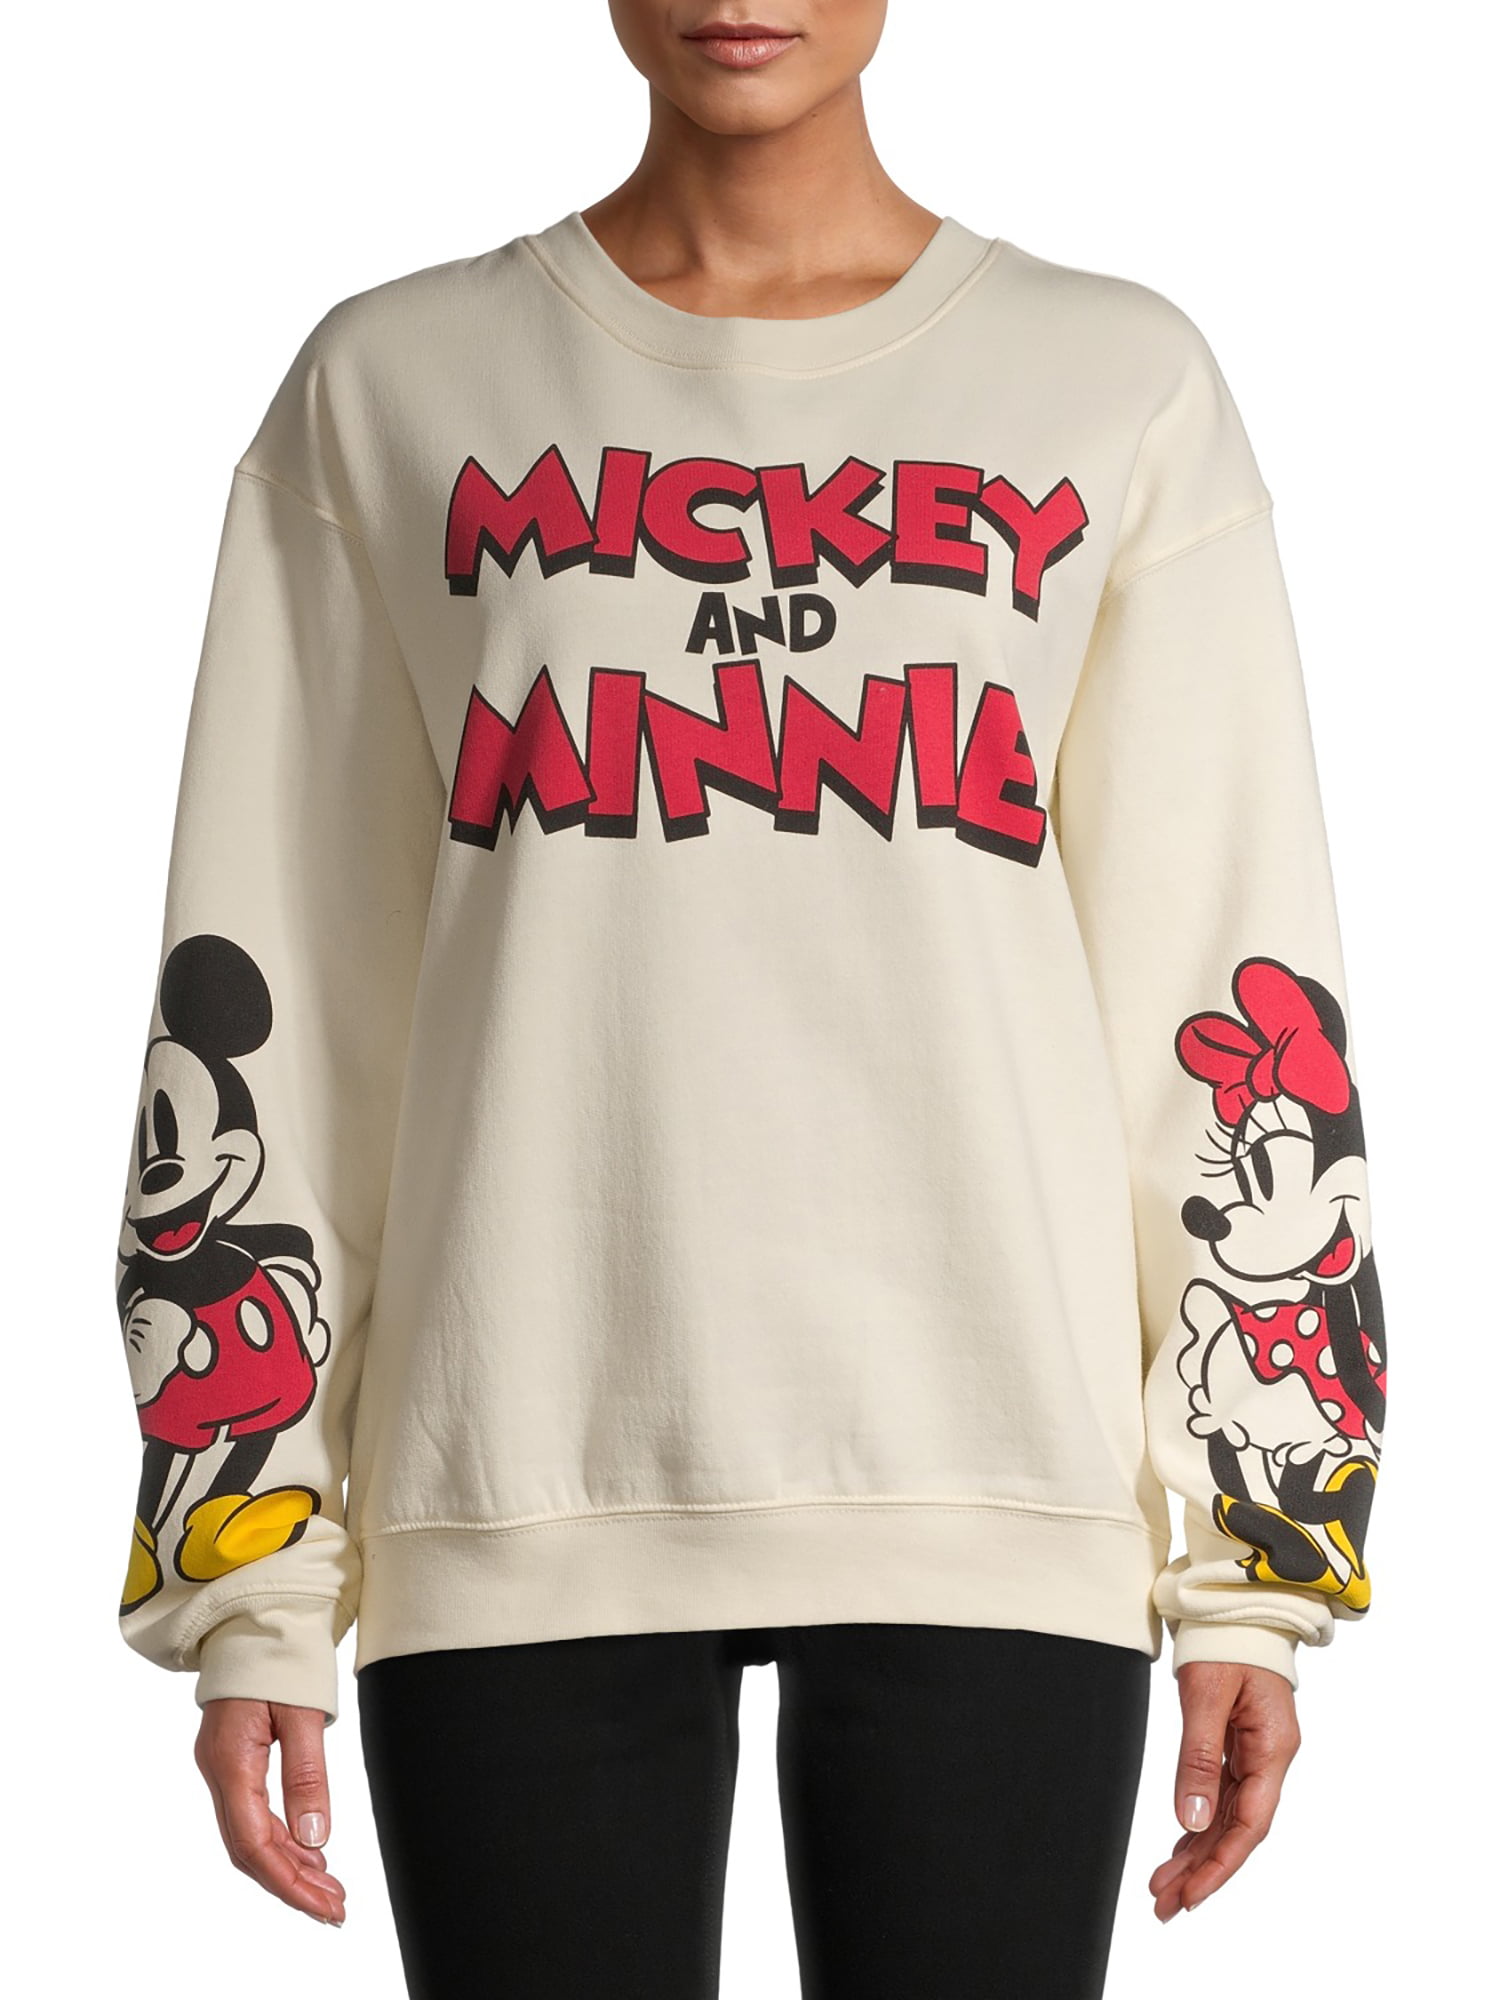 Disney Womens Mickey and Minnie Love Never Goes Out of Style Sweatshirt